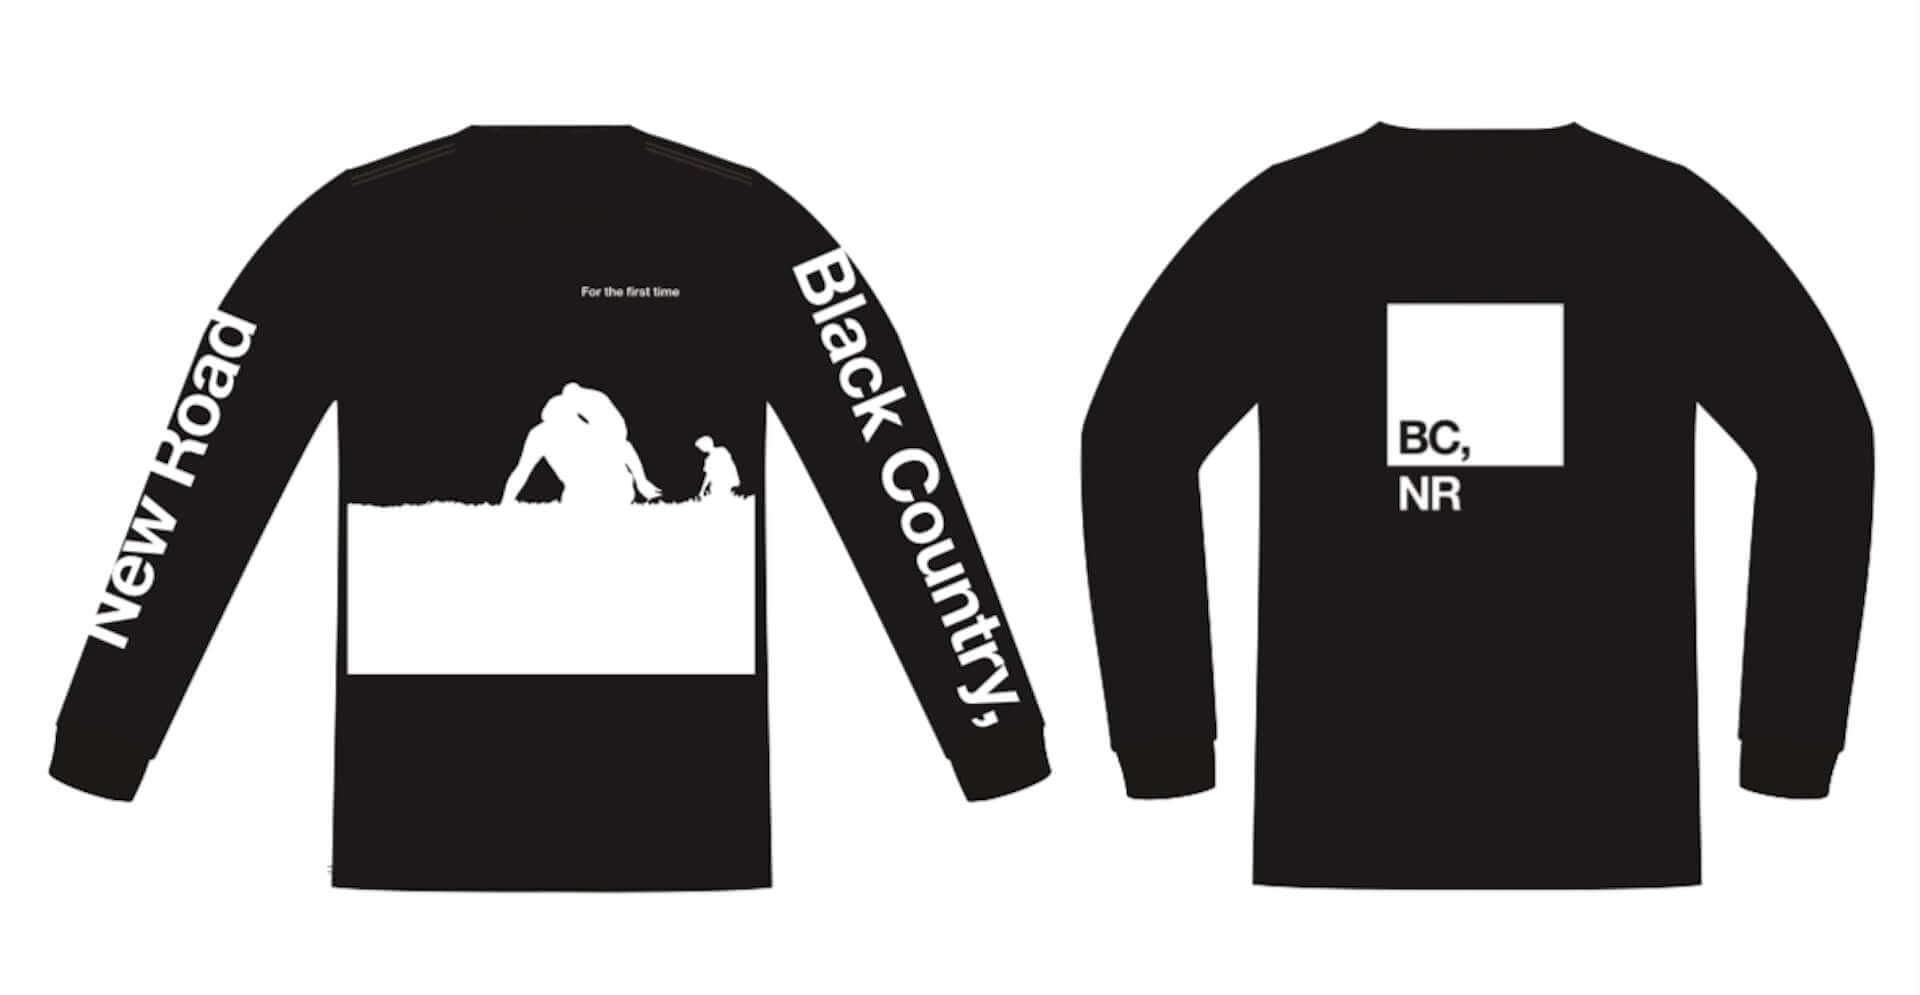 Black Country, New Roadのデビュー作『For the first time』がリリース！〈BIG LOVE RECORDS〉とのコラボTシャツも発売 music210205_bcnr_2-1920x995